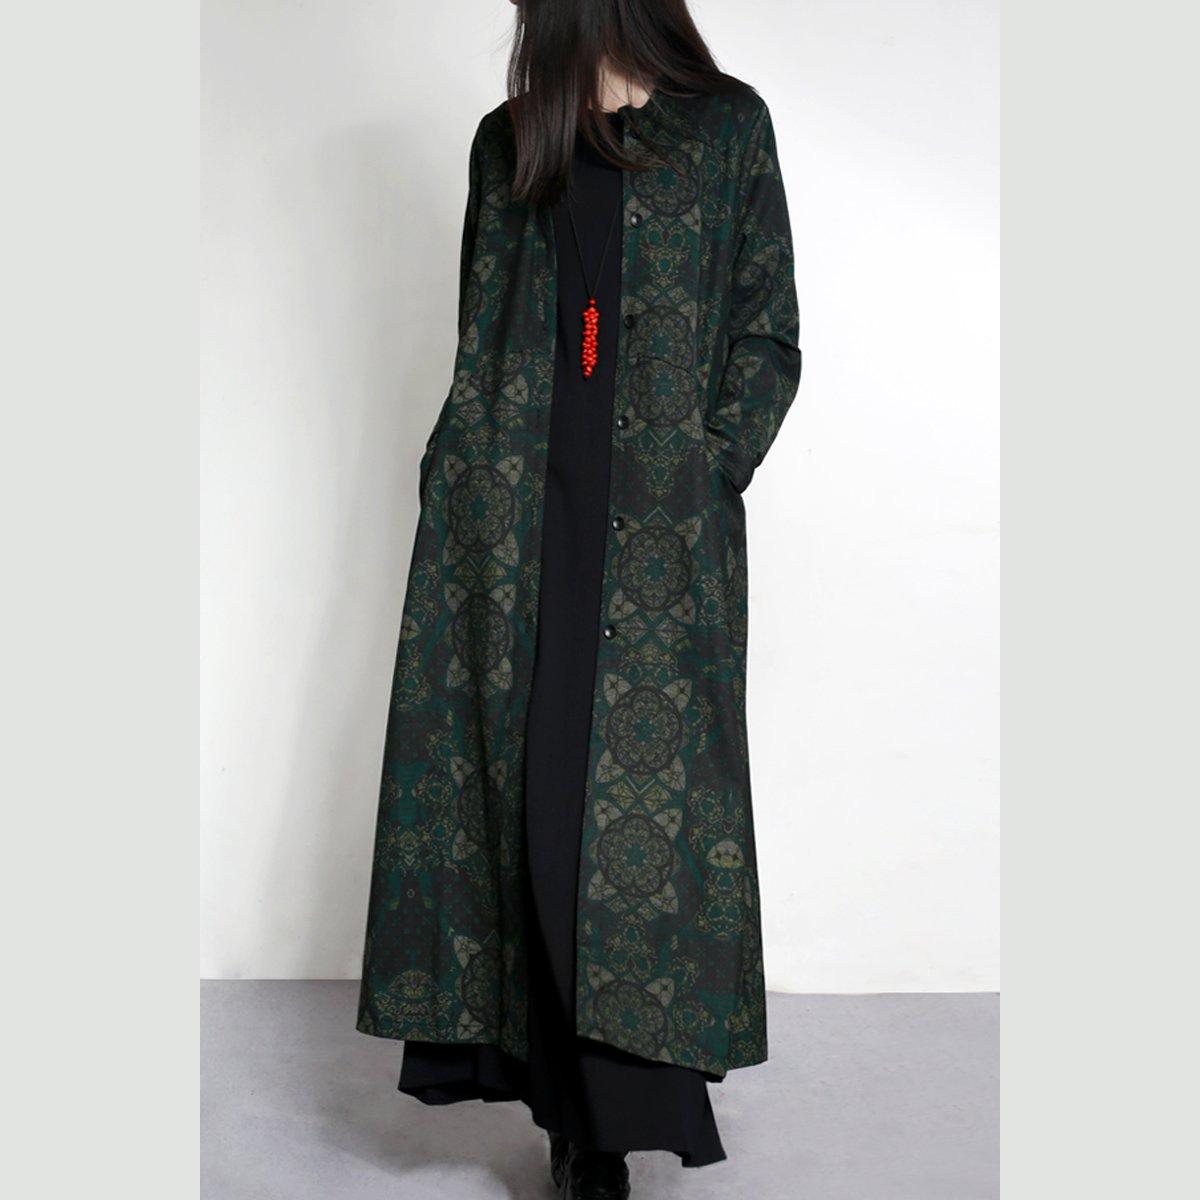 Autumn winter 2017 green prints cotton outwear draping elegant casual long trench coats - Omychic